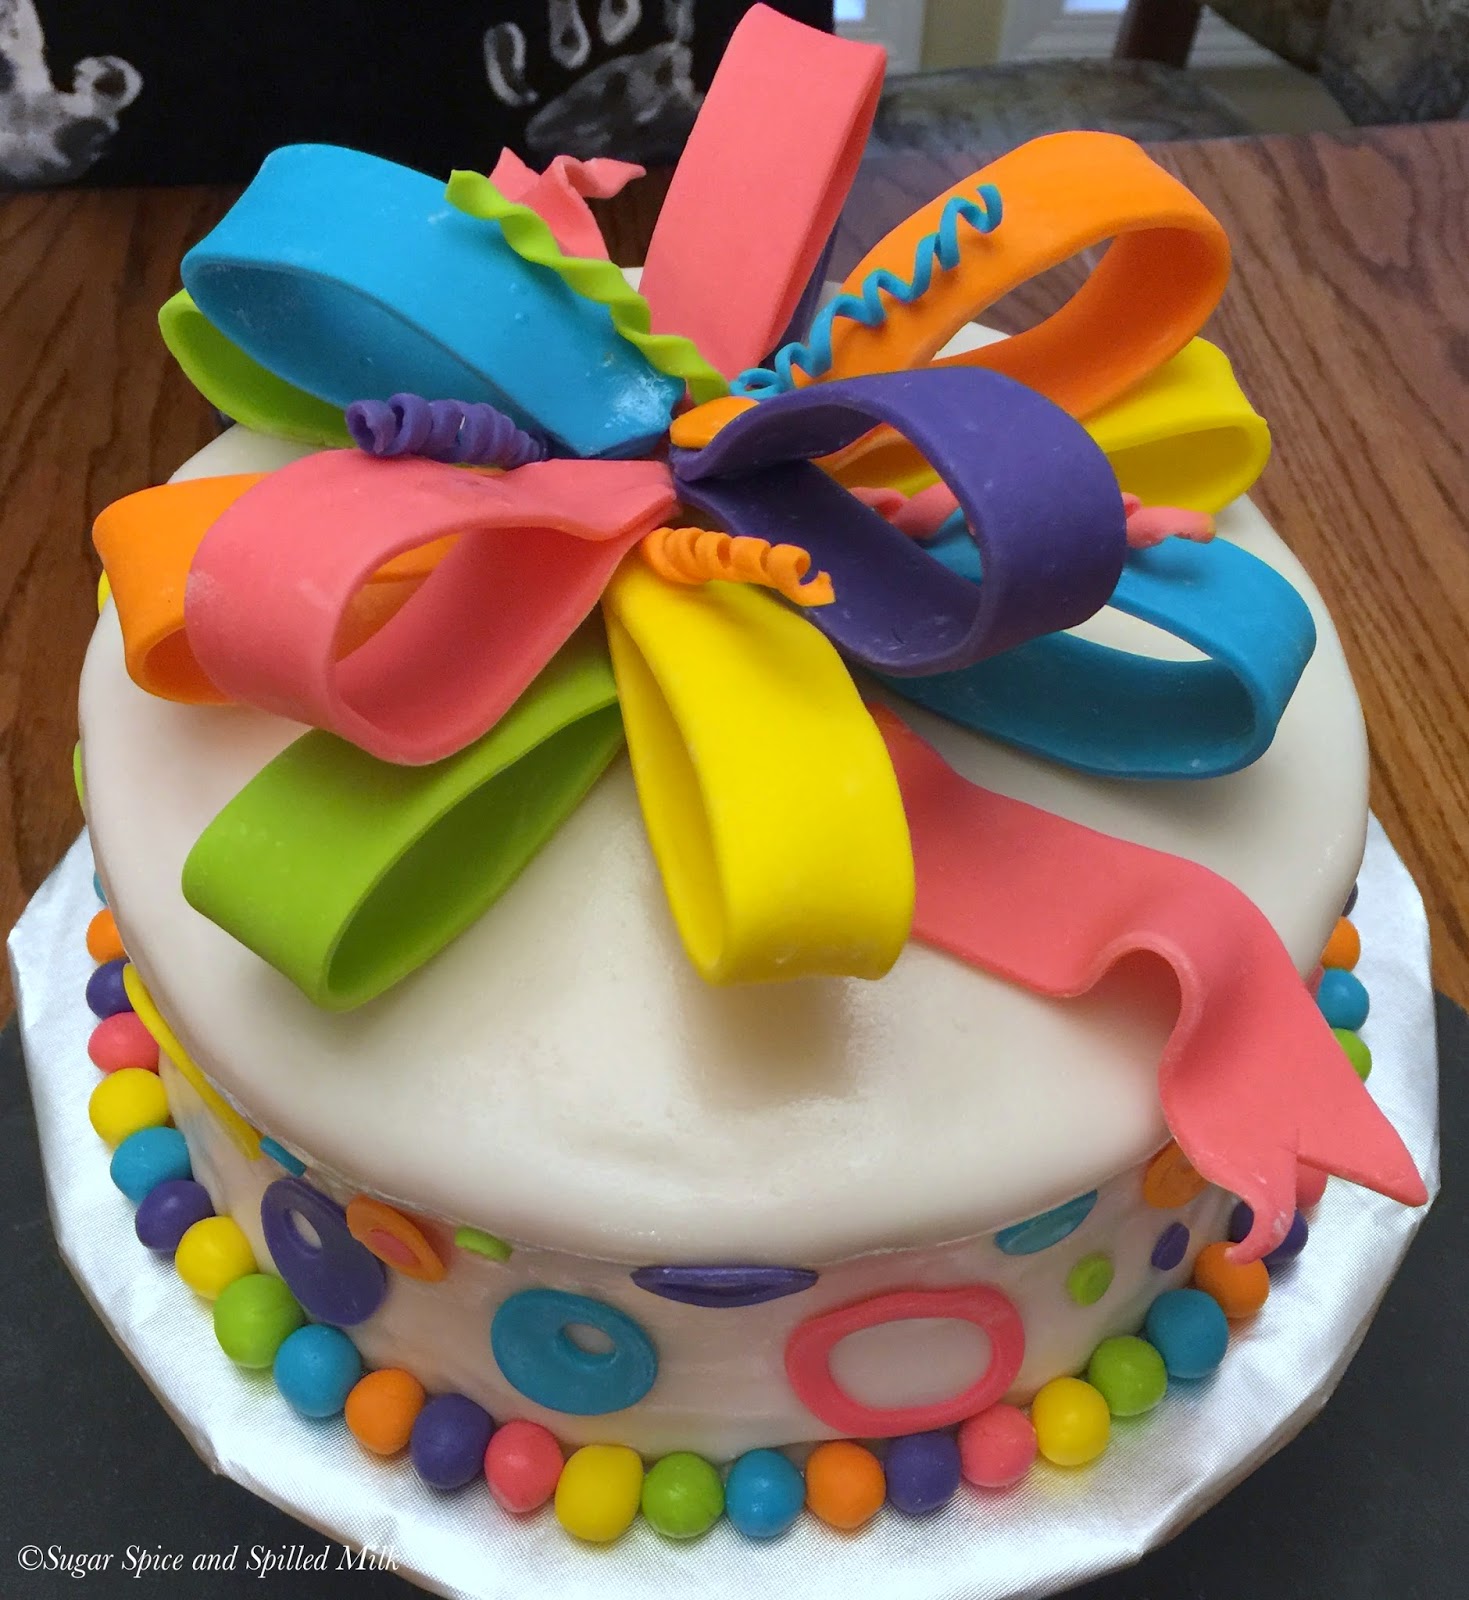 Sugar Spice and Spilled Milk: The Bow Cake and Other Cool ...